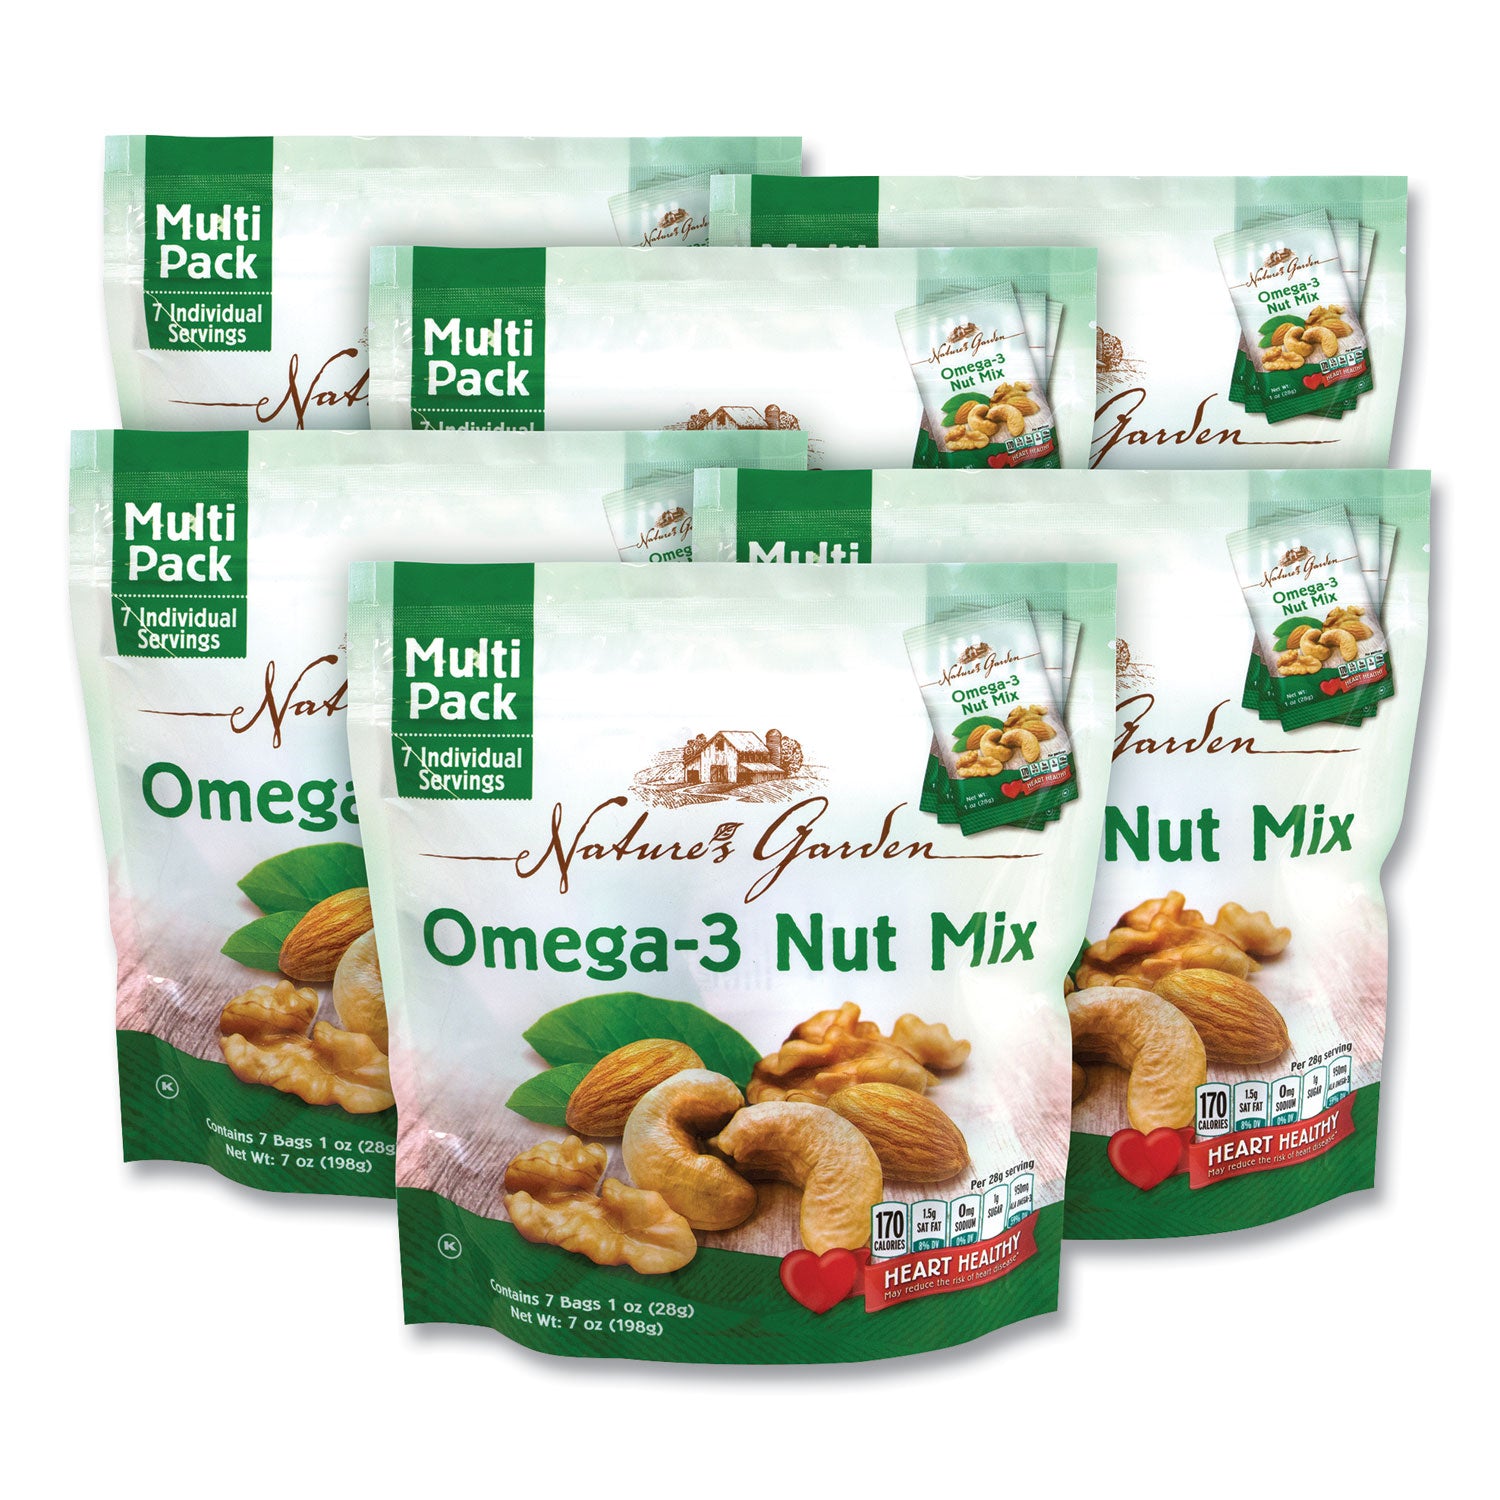 omega-3-nut-mix-1-oz-pouch-7-pouches-pack-6-packs-carton-ships-in-1-3-business-days_grr29400007 - 1